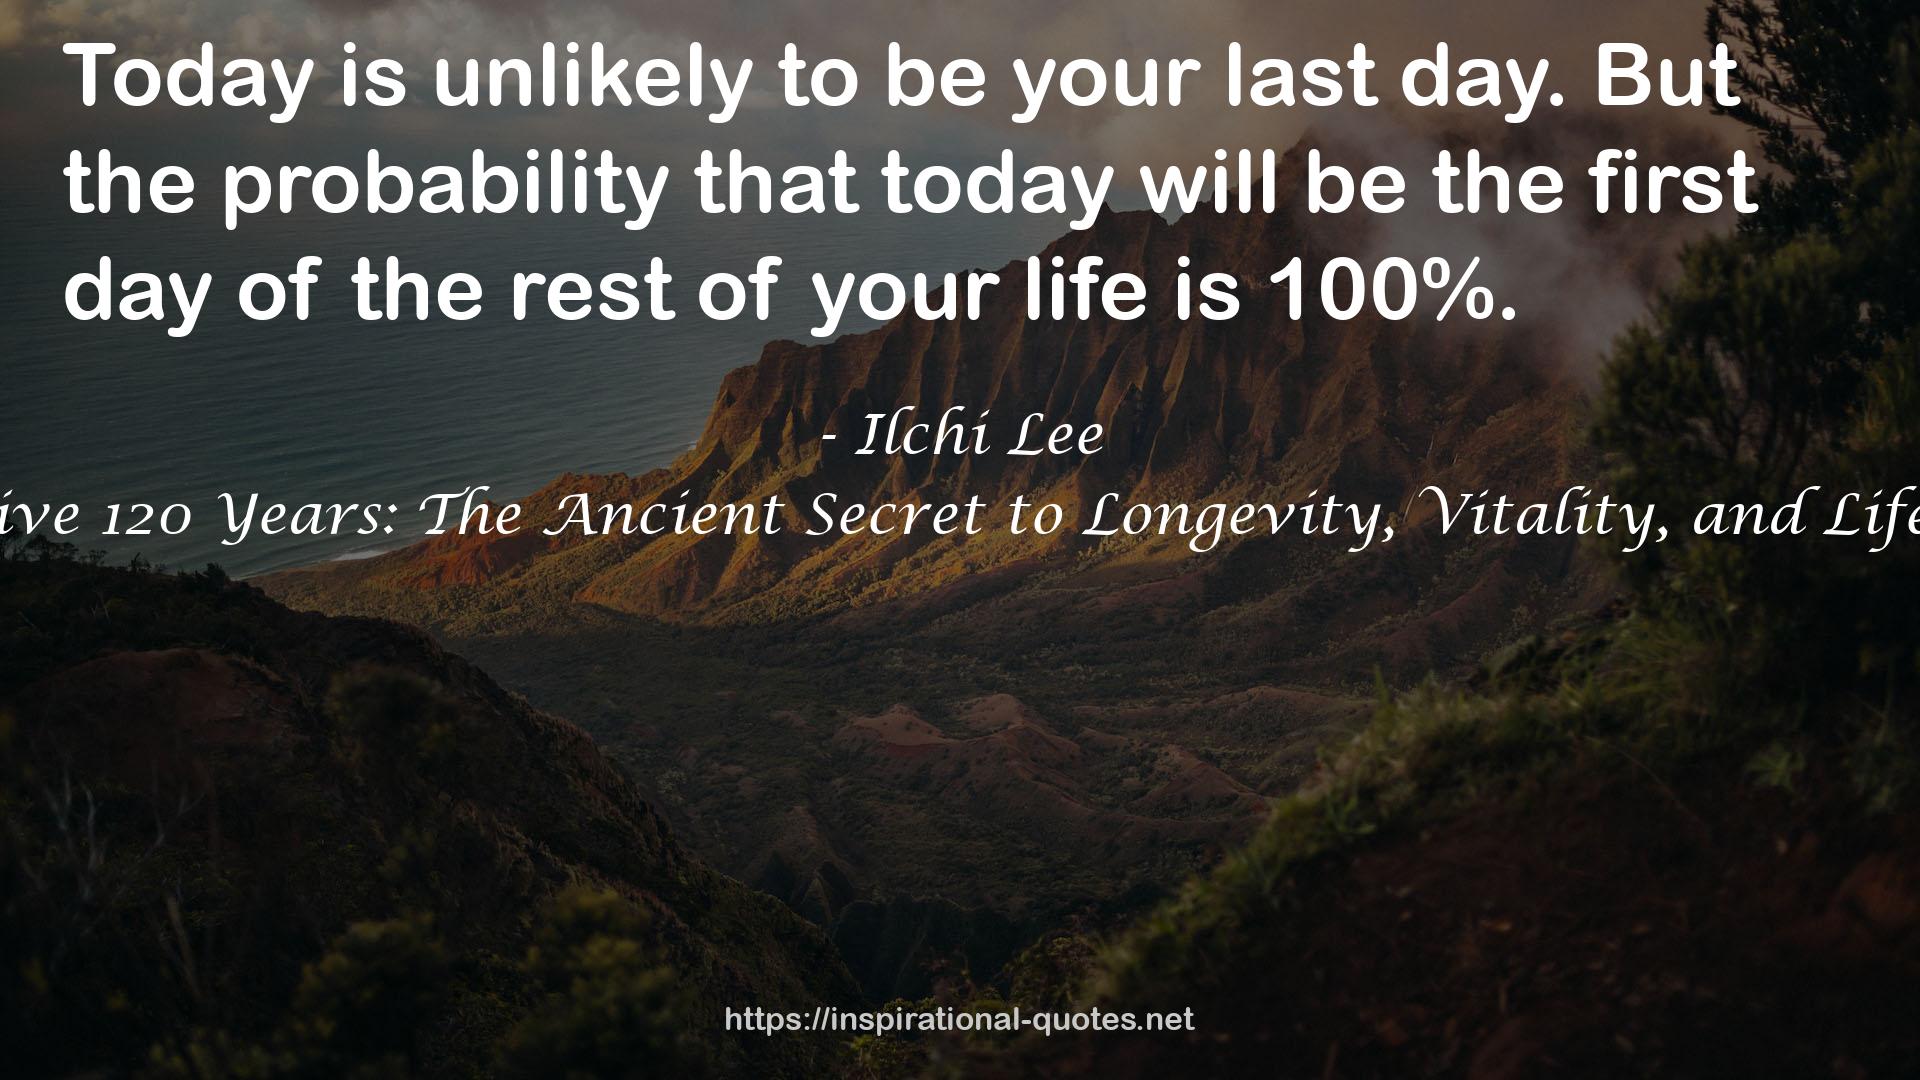 I've Decided to Live 120 Years: The Ancient Secret to Longevity, Vitality, and Life Transformation QUOTES